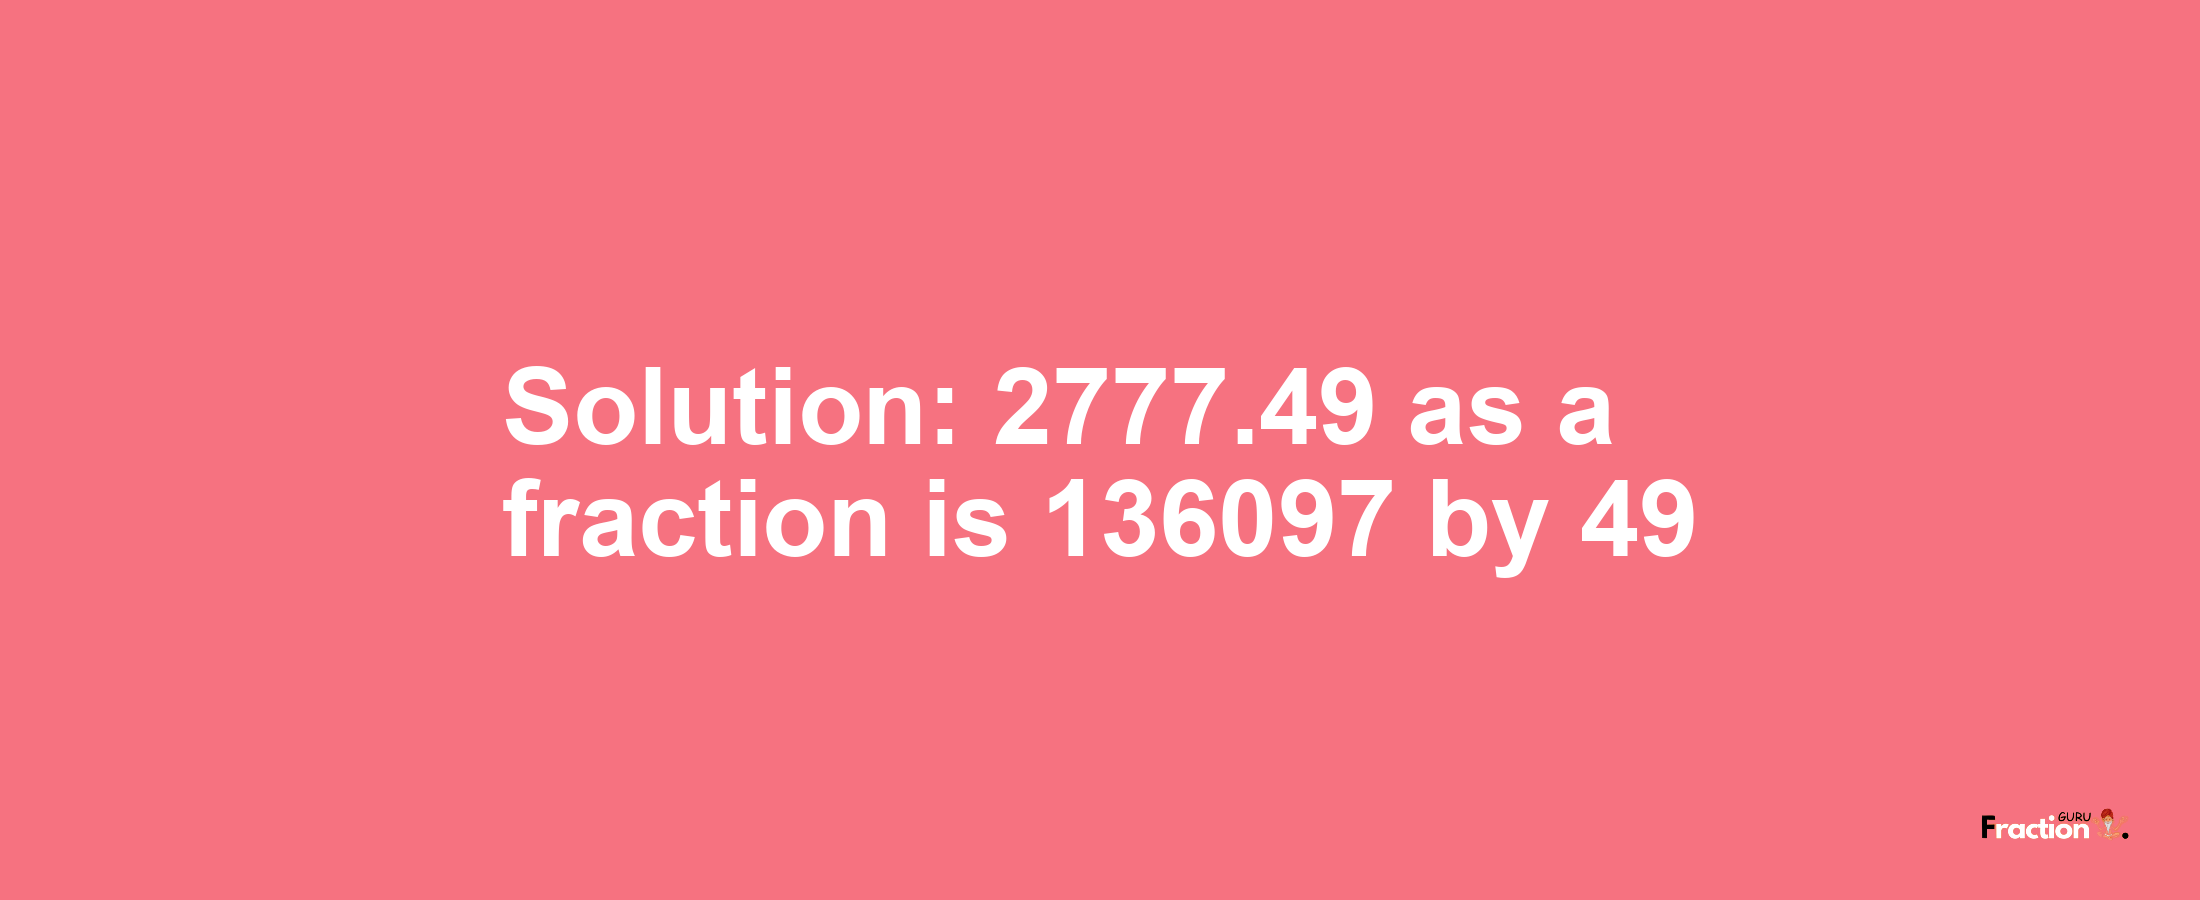 Solution:2777.49 as a fraction is 136097/49